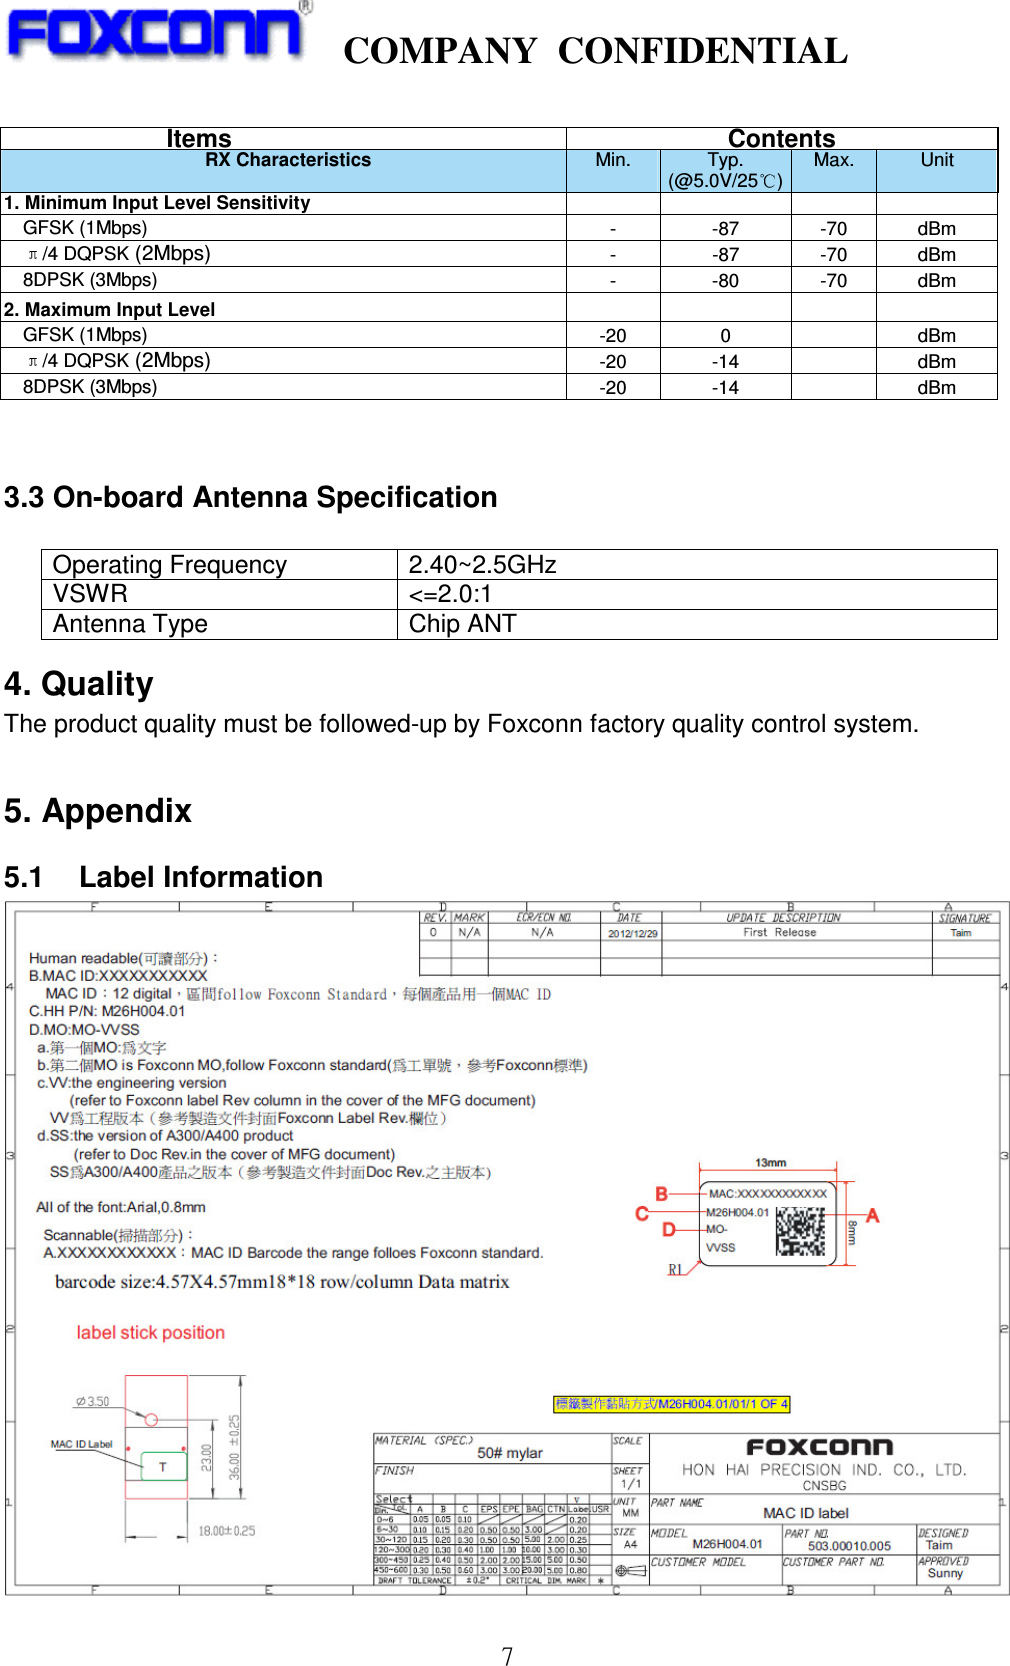     COMPANY  CONFIDENTIAL             7  3.3 On-board Antenna Specification  Operating Frequency  2.40~2.5GHz VSWR  &lt;=2.0:1 Antenna Type  Chip ANT 4. Quality The product quality must be followed-up by Foxconn factory quality control system.    5. Appendix 5.1  Label Information  Items Contents   RX Characteristics    Min.  Typ. (@5.0V/25 ) Max.  Unit  1. Minimum Input Level Sensitivity             GFSK (1Mbps)  -  -87  -70  dBm   /4 DQPSK (2Mbps) -  -87  -70  dBm     8DPSK (3Mbps)  -  -80  -70  dBm 2. Maximum Input Level             GFSK (1Mbps)  -20  0    dBm   /4 DQPSK (2Mbps) -20  -14    dBm     8DPSK (3Mbps)  -20  -14    dBm 